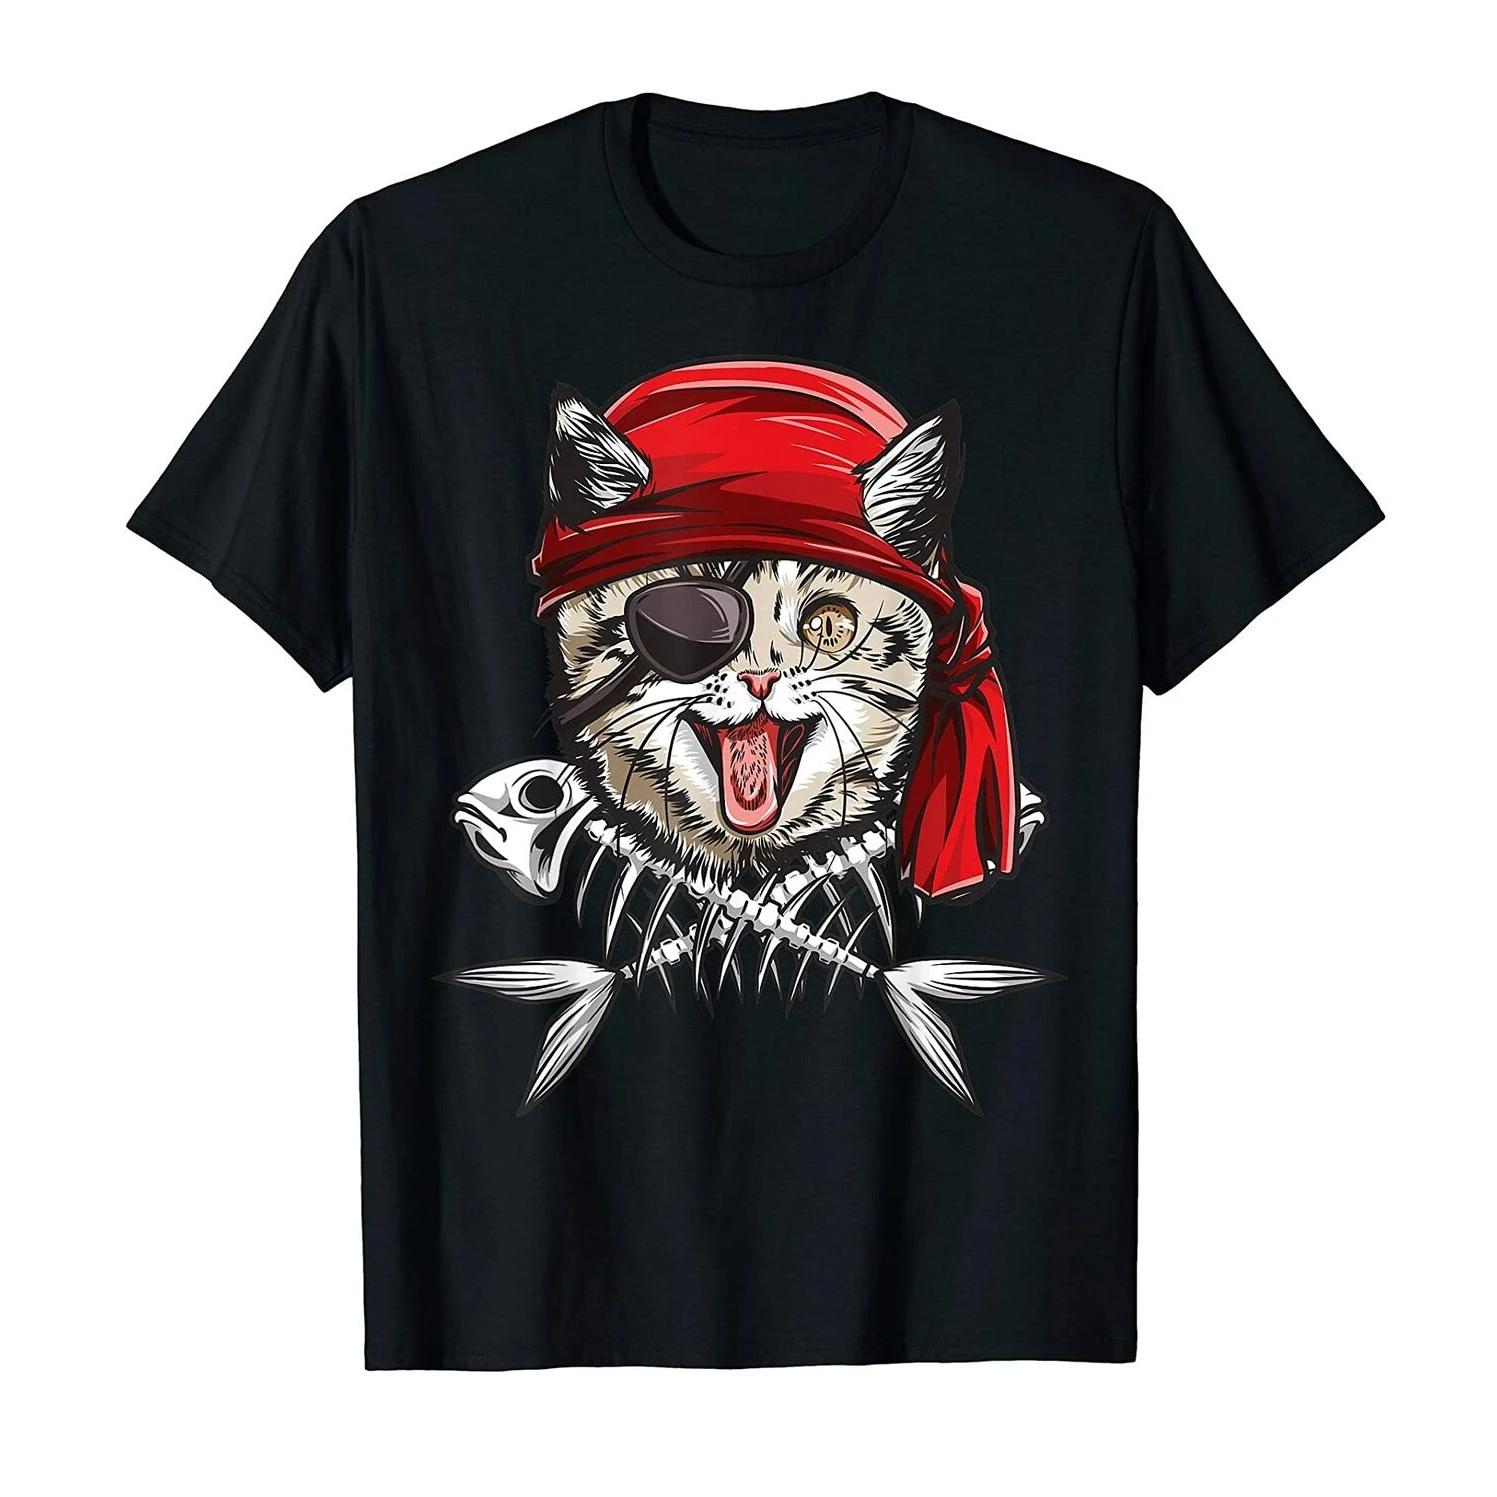 

Skull and Crossbones Jolly Roger Flag. Funny Pirate Cat T Shirt. Short Sleeve 100% Cotton Casual T-shirts Loose Top Size S-3XL